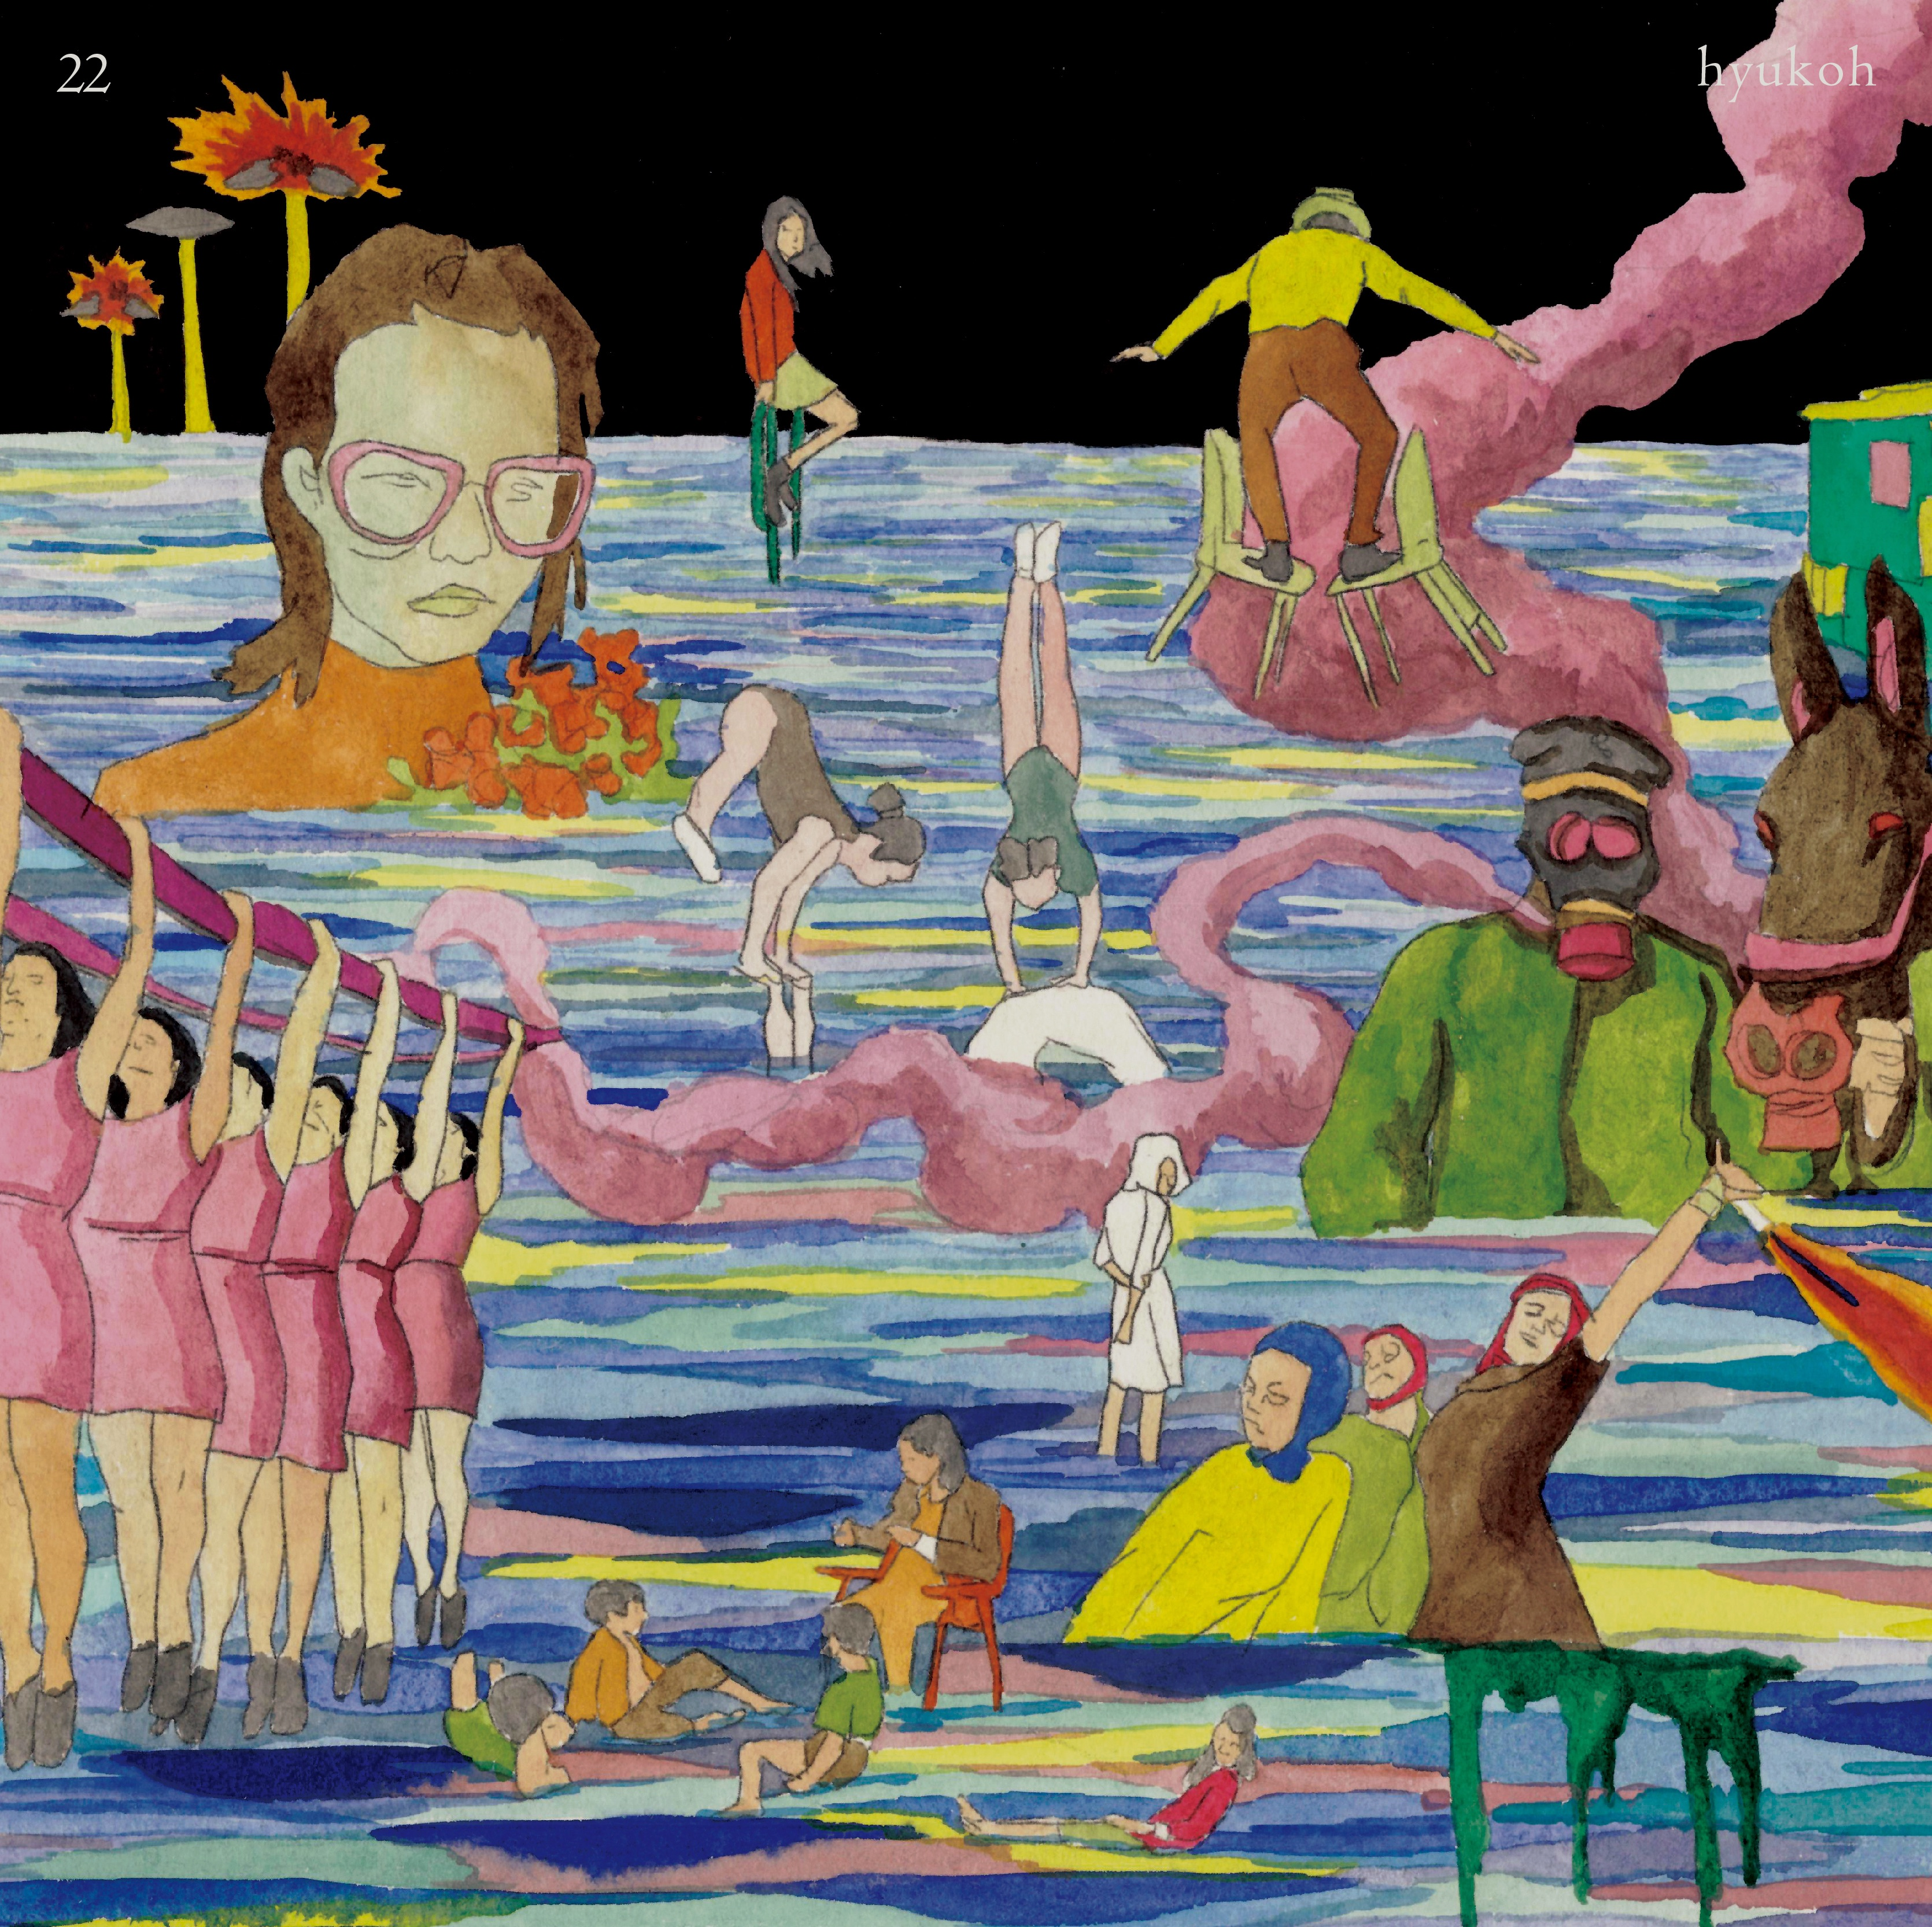 The image is an abstract illustration that features a background that consists of a pitch-black sky and an ocean painted with purple, yellow, pink and various blues. In the foreground are a baby pink smoke cloud and various individual people and animals. You can see various small figures, gymnasts, children listening to a teacher, a large head of a woman wearing pink glasses, a man in a yellow shirt standing on floating chairs, and a man in a green shirt wearing a gas mask while holding the halter of a horse by his side.